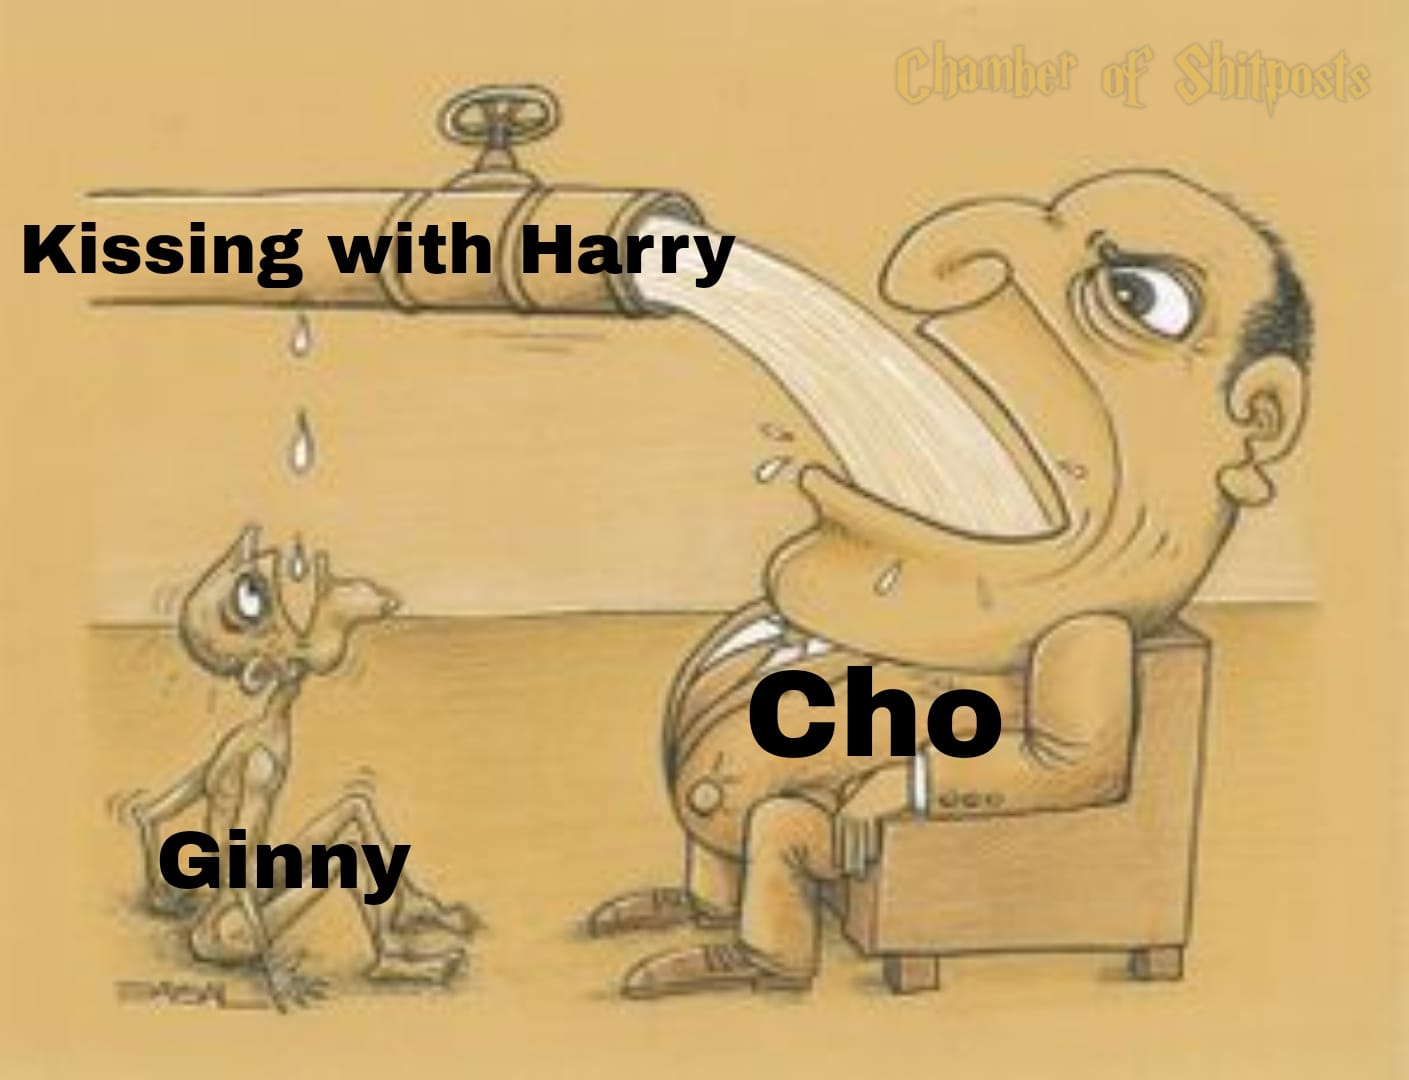 Harry Potter memes - greedy pipe meme - Kissing with Harry Ginny Chouhot of Shitposts Cho